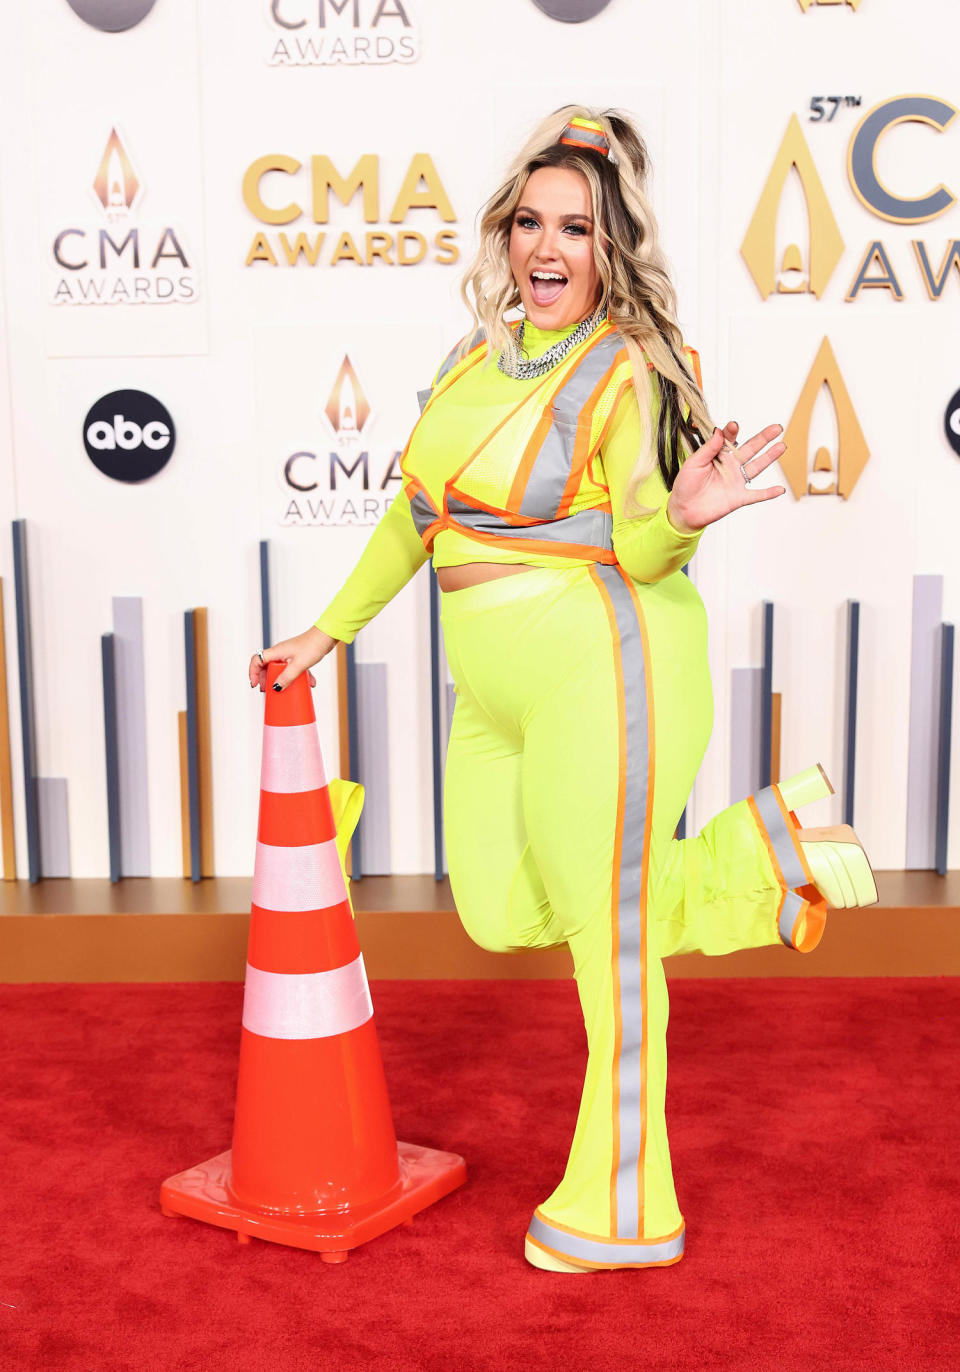 Country singer Priscilla Block dresses as a traffic cone at the CMA Awards